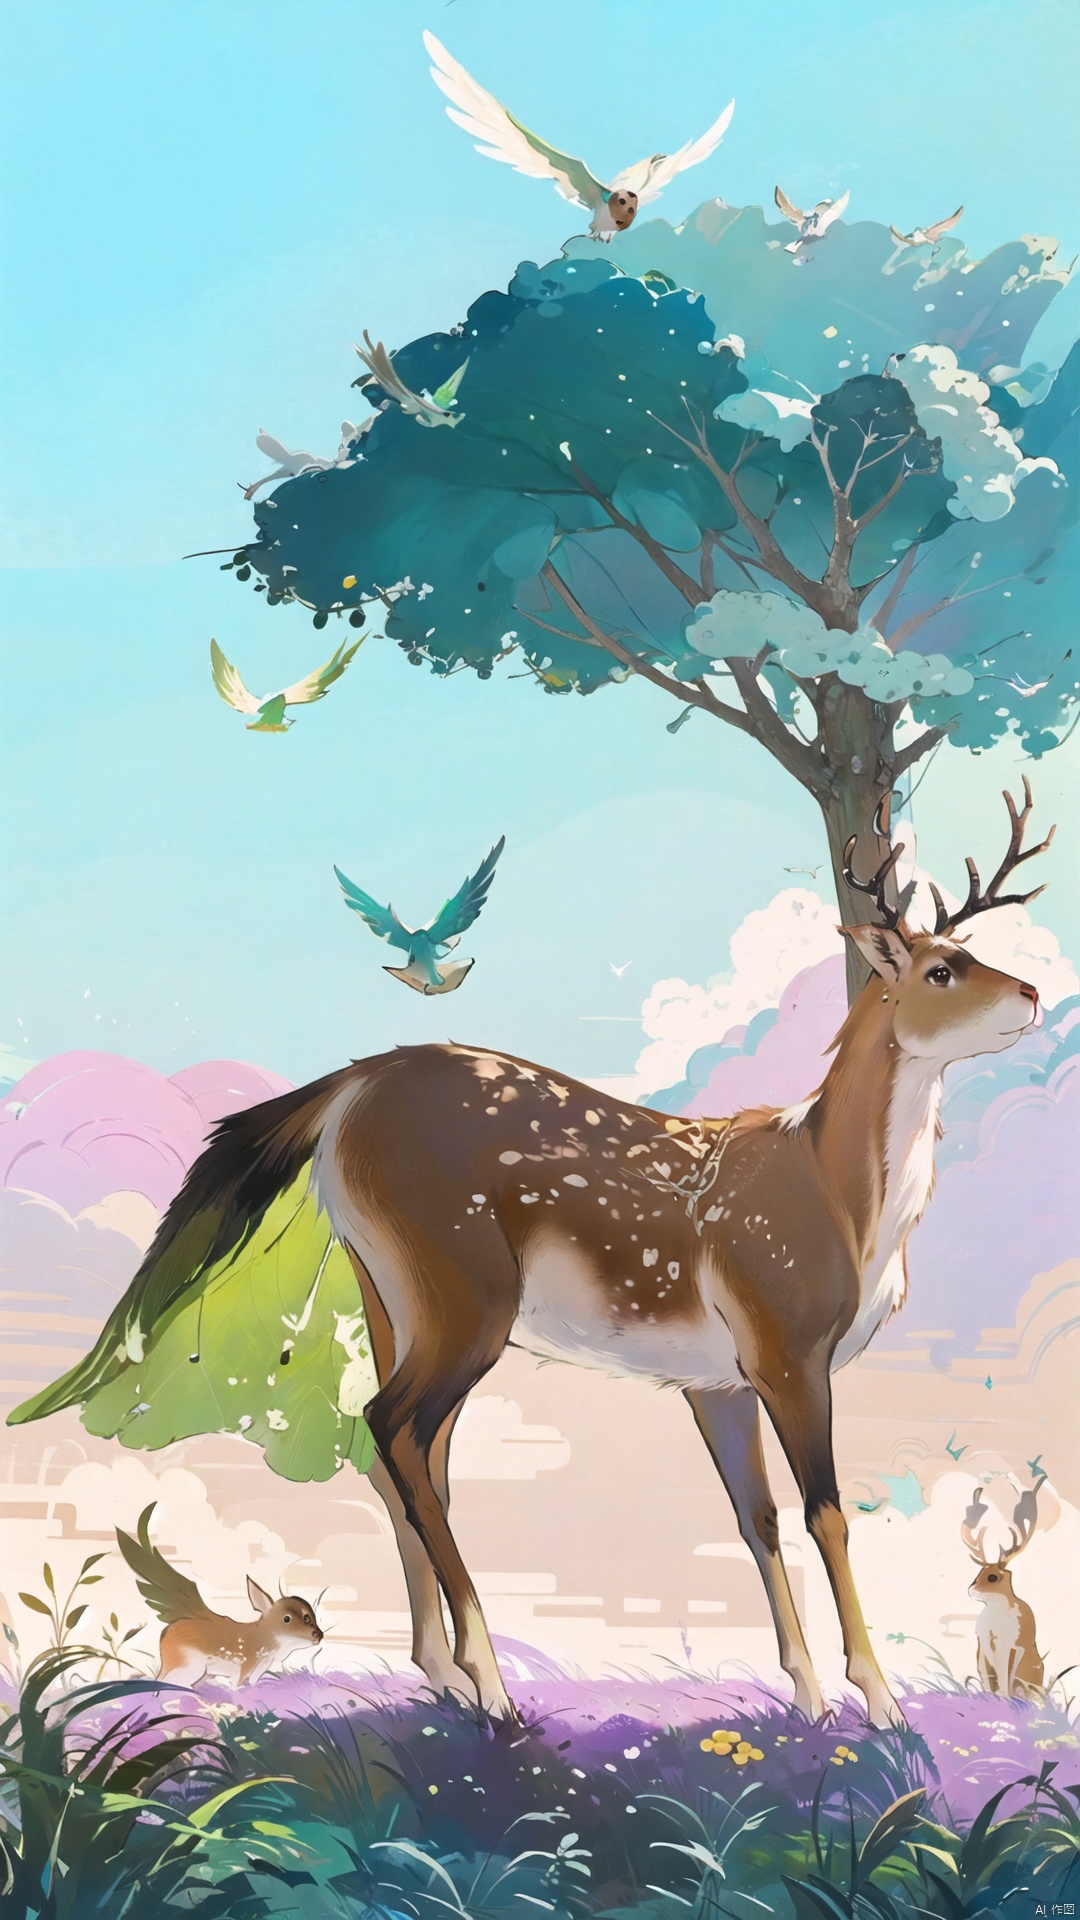 miku,forest,elf,ears,wings,horn,dress,flowers,grass,trees,animals,deer,rabbit,bird,sun,sky,green,white,yellow,beautiful,magical,mysterious,foreground,middle ground,background,angle,three-quarter view,light,soft,warm,color,pastel,atmosphere,enchanting,anime